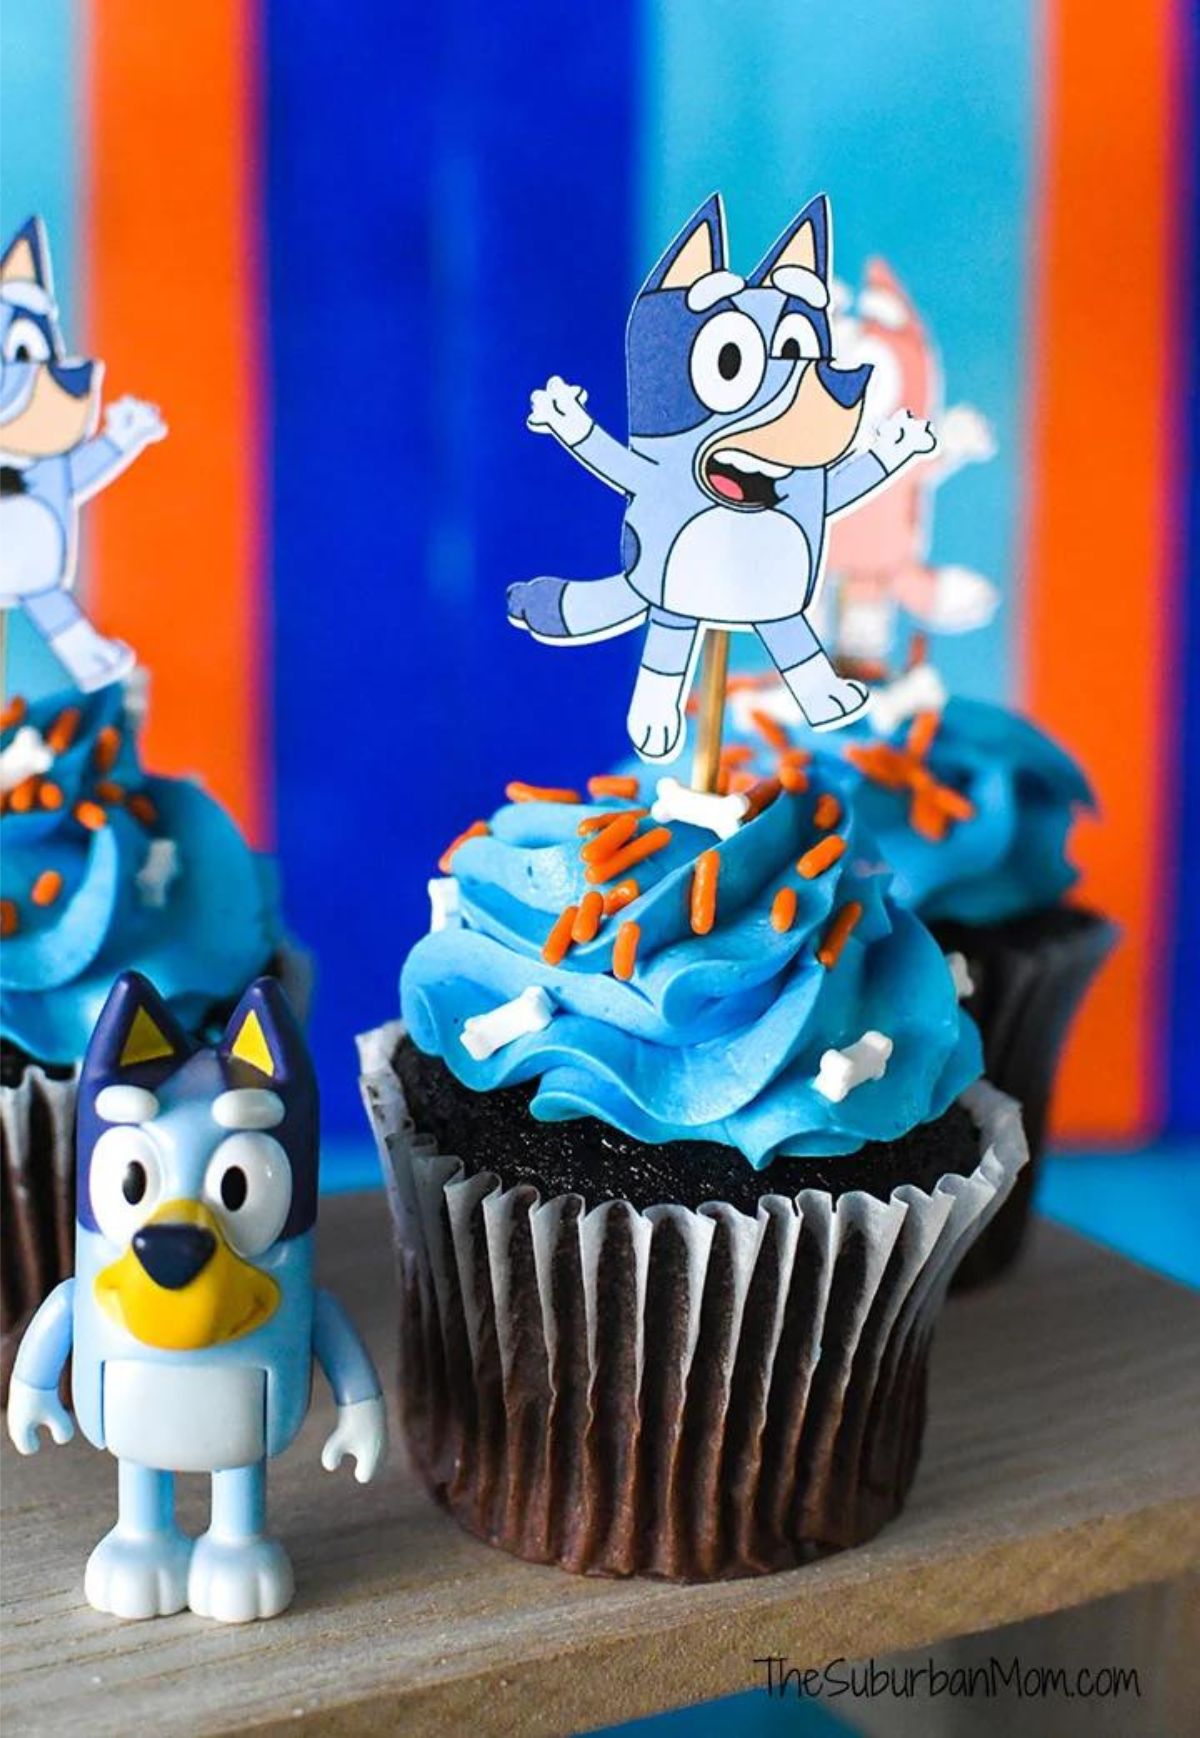 Cupcakes With Bluey Cake Toppers